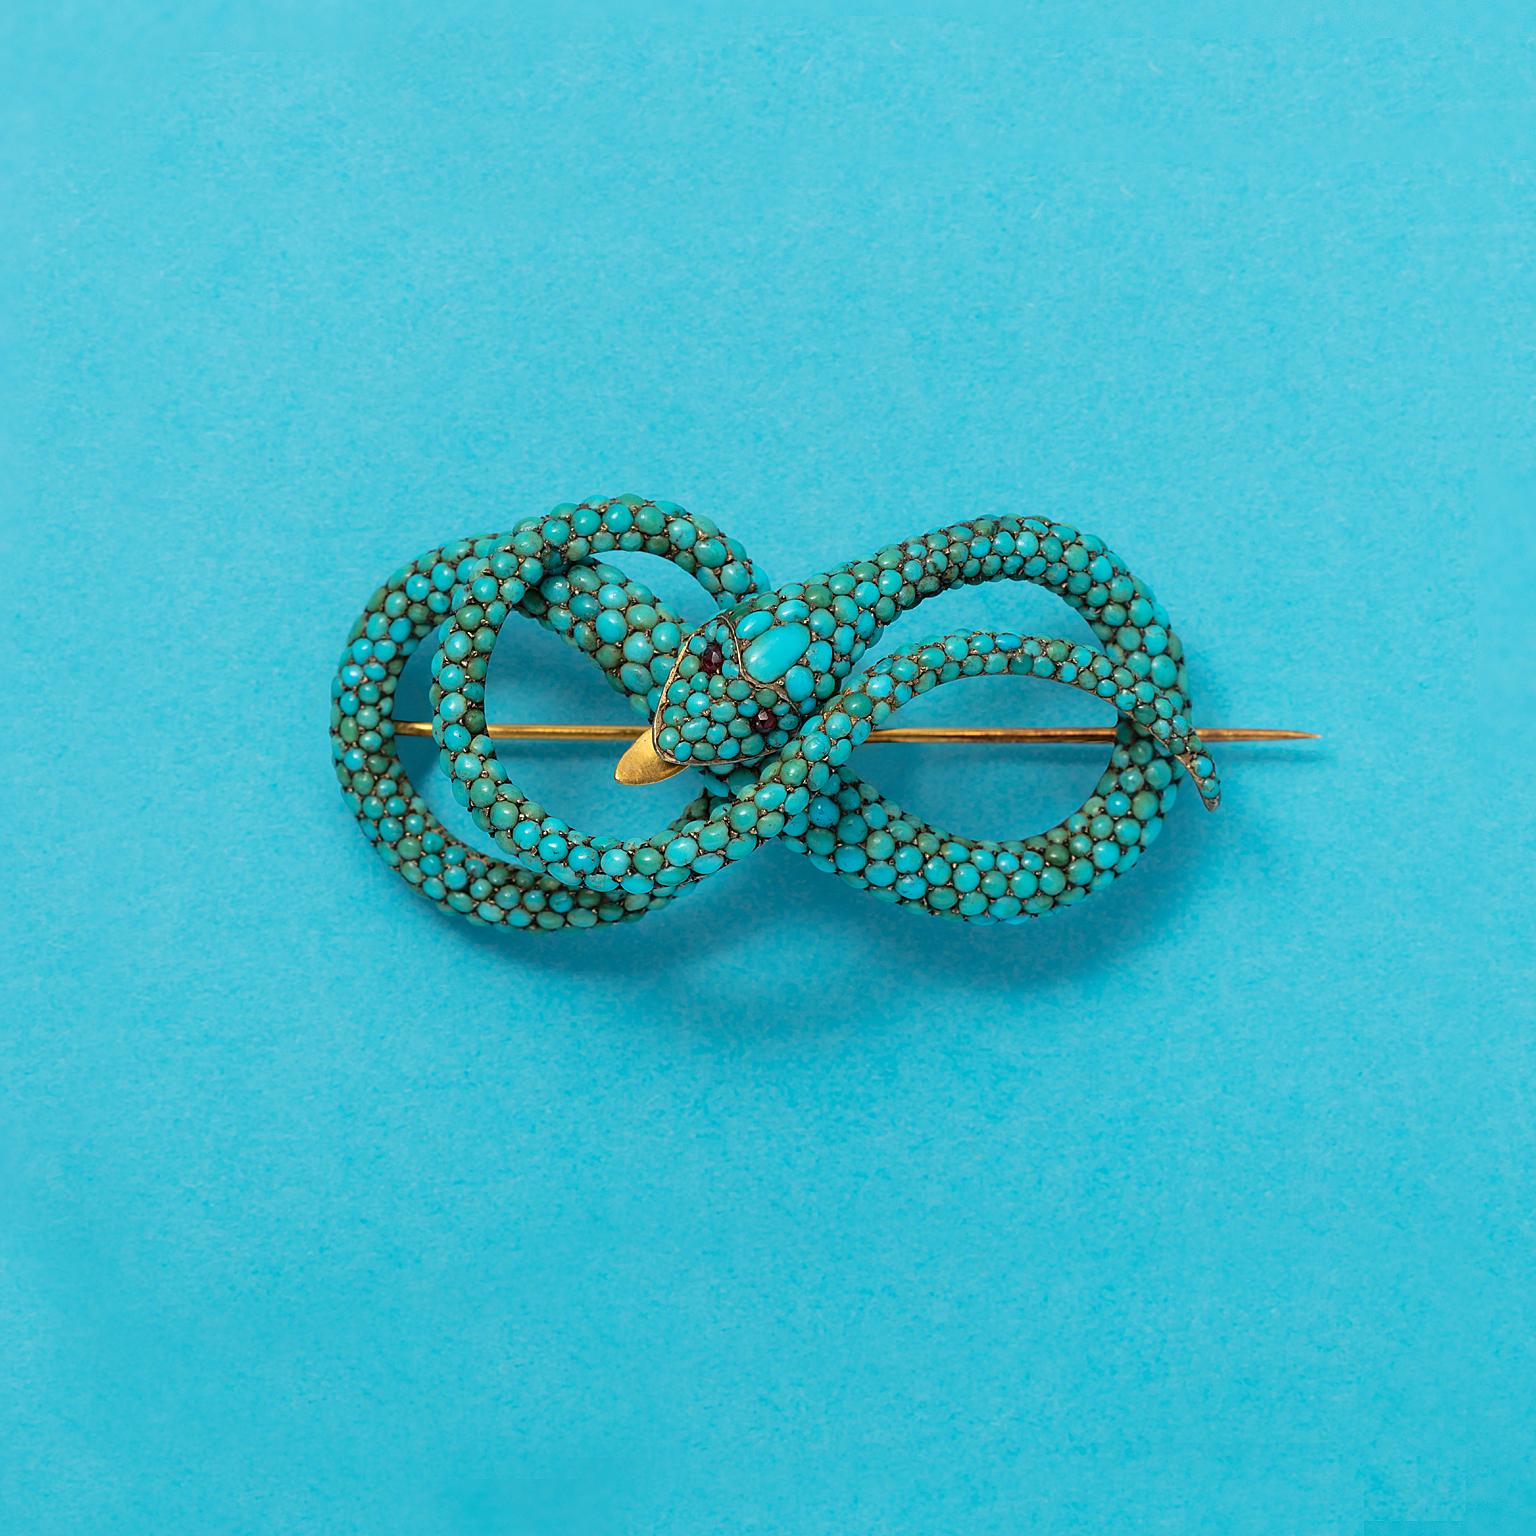 A large curled snake brooch set with round, cabochon cut turquoises and small facetted garnets in the eyes, with an articulating hinged tail, England, circa 1830.

weight: 31.67 gram
dimensions: 6.7 x 3.0 cm (pin 7.2 cm)